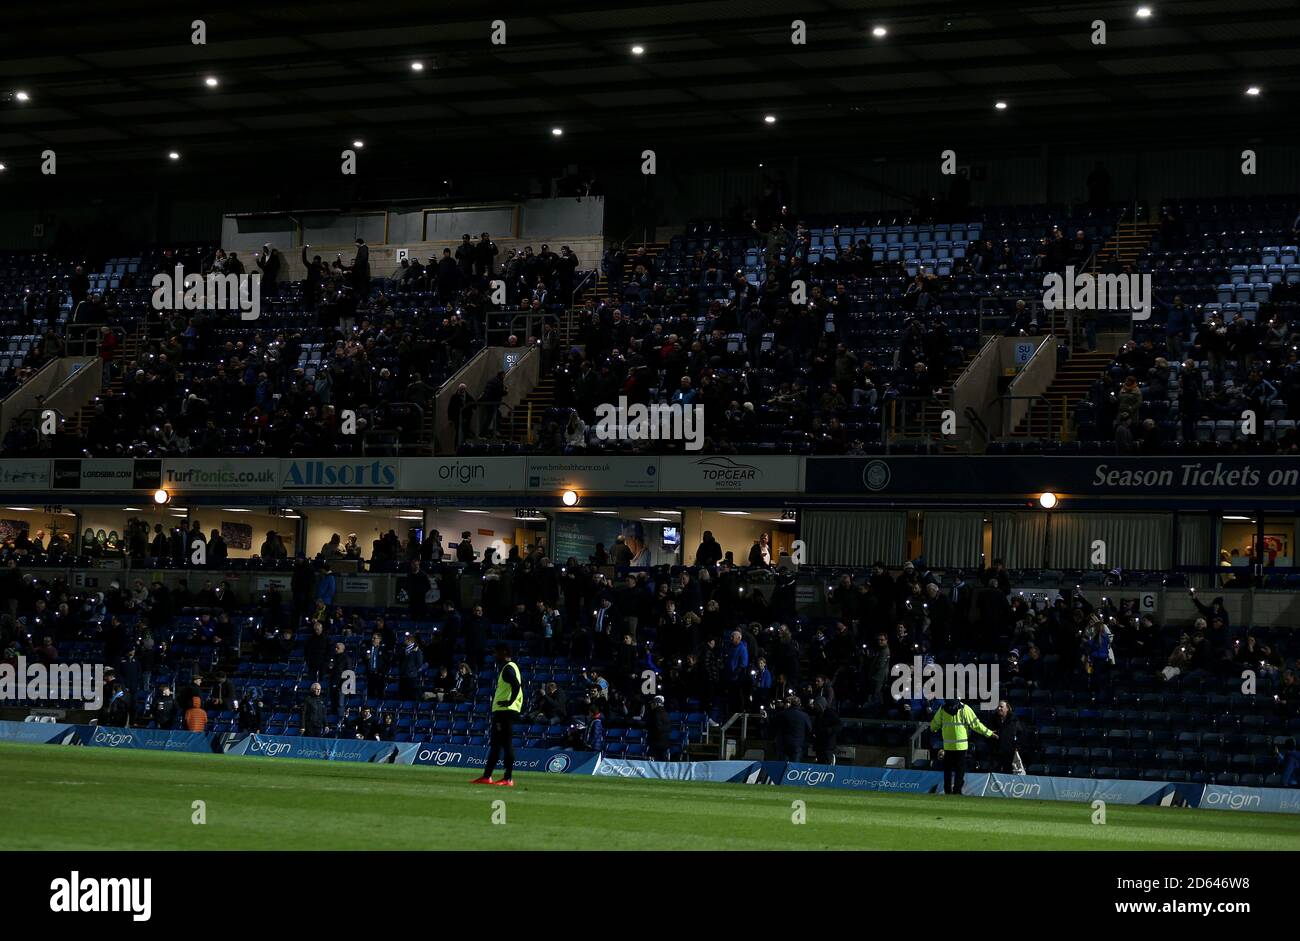 Wycombe Wanderers fans using their mobile phones torches at half time for mental heath awareness  Stock Photo